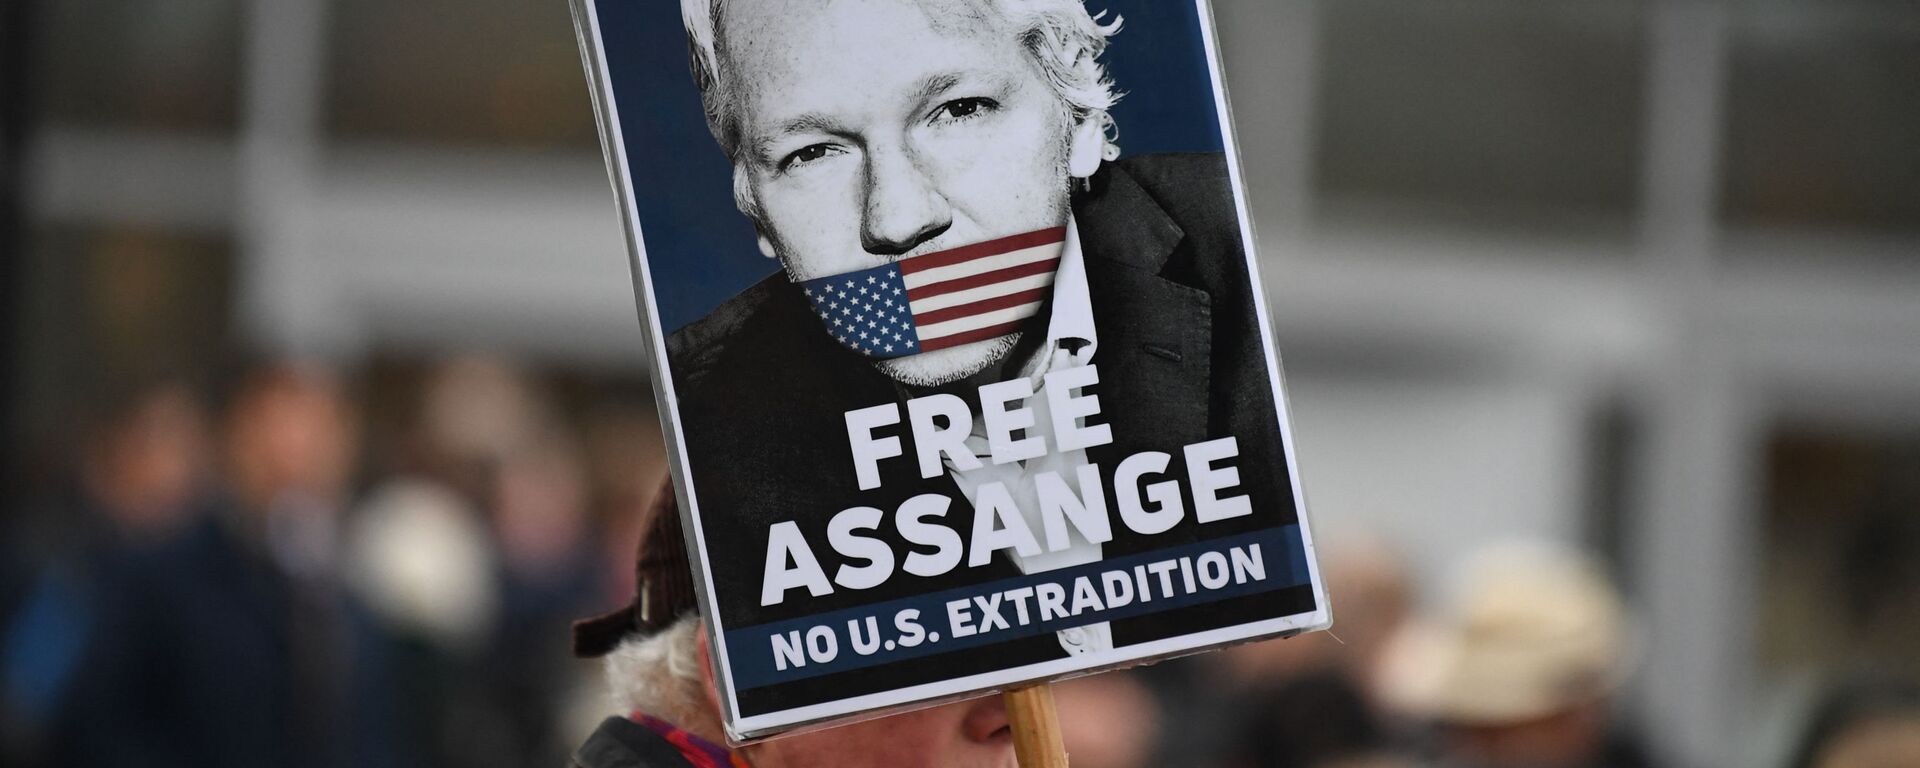 A supporter of WikiLeaks founder Julian Assange holds a placard calling for his freedom outside Woolwich Crown Court and HMP Belmarsh prison in southeast London on February 24, 2020, ahead of the opening of the trial to hear a US request for Assange's extradition - Sputnik International, 1920, 29.06.2021